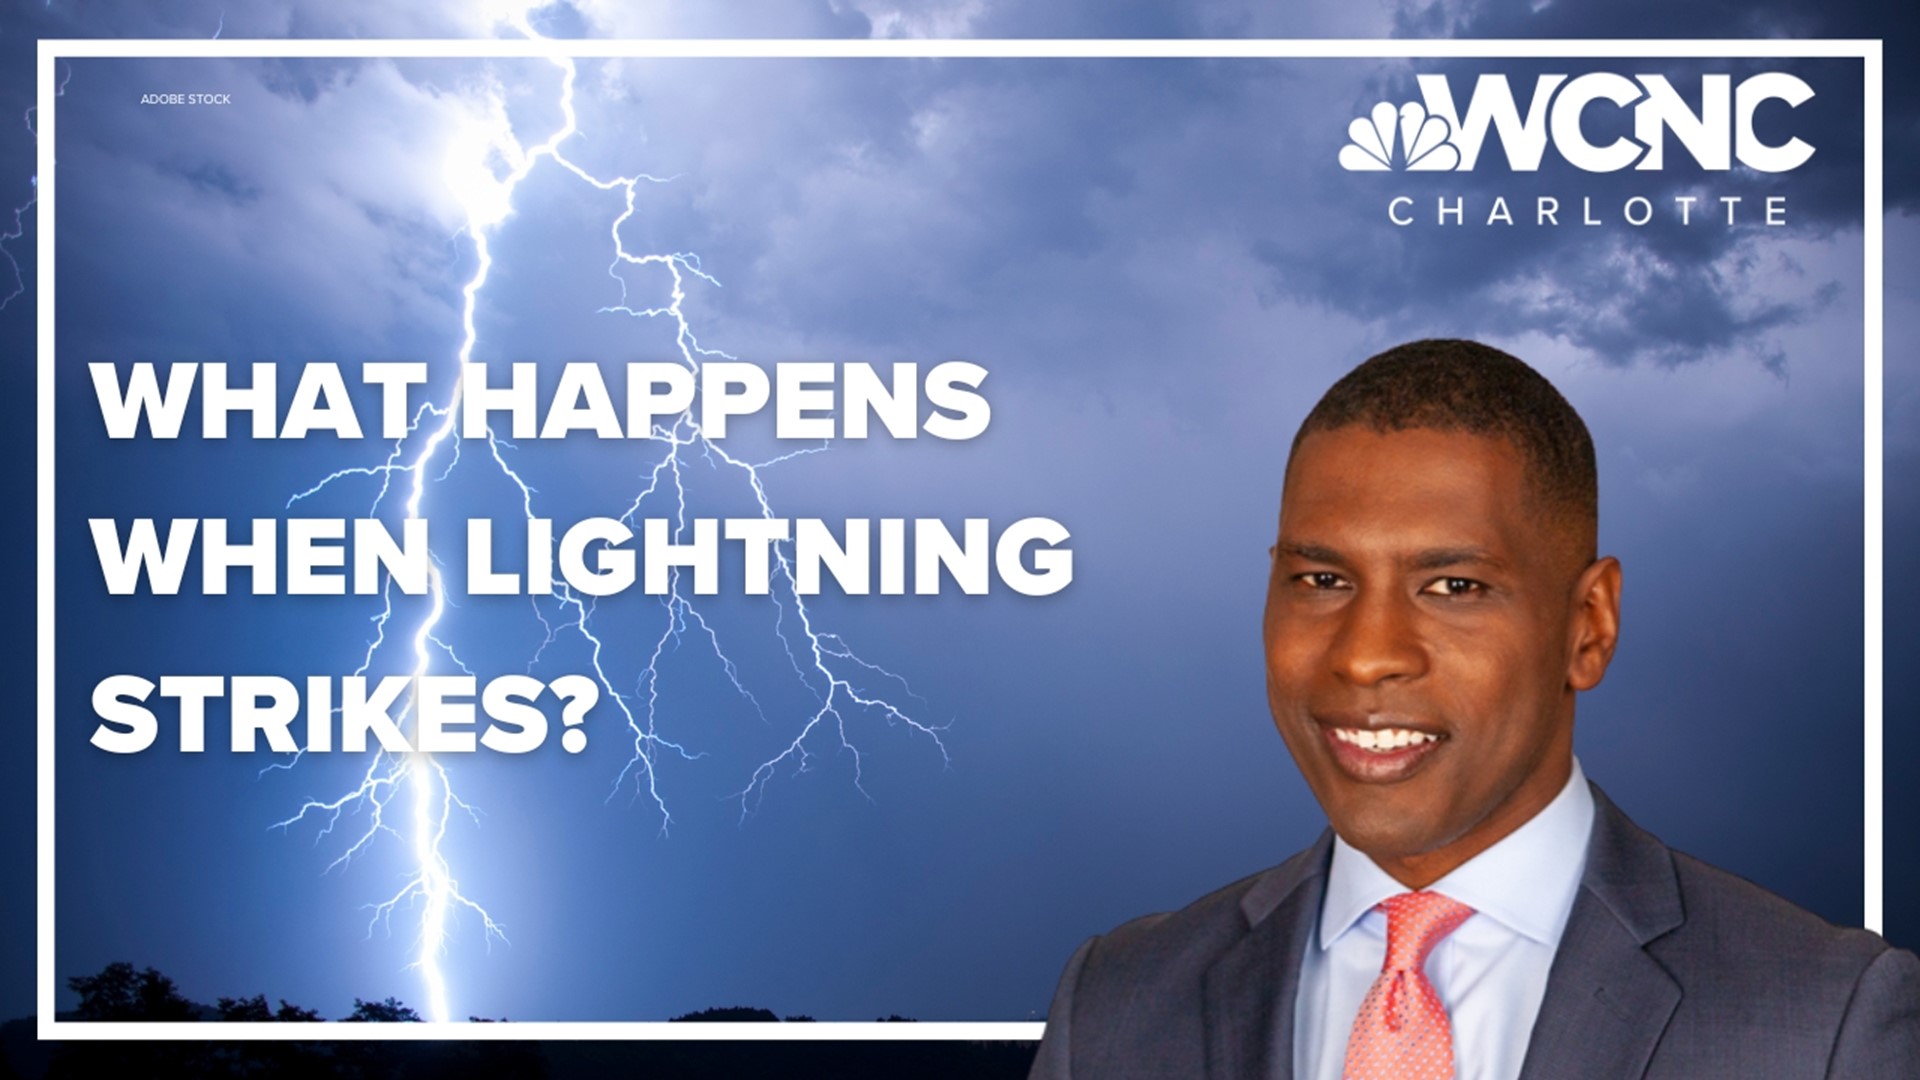 KJ Jacobs details what you can expect when lightning strikes.